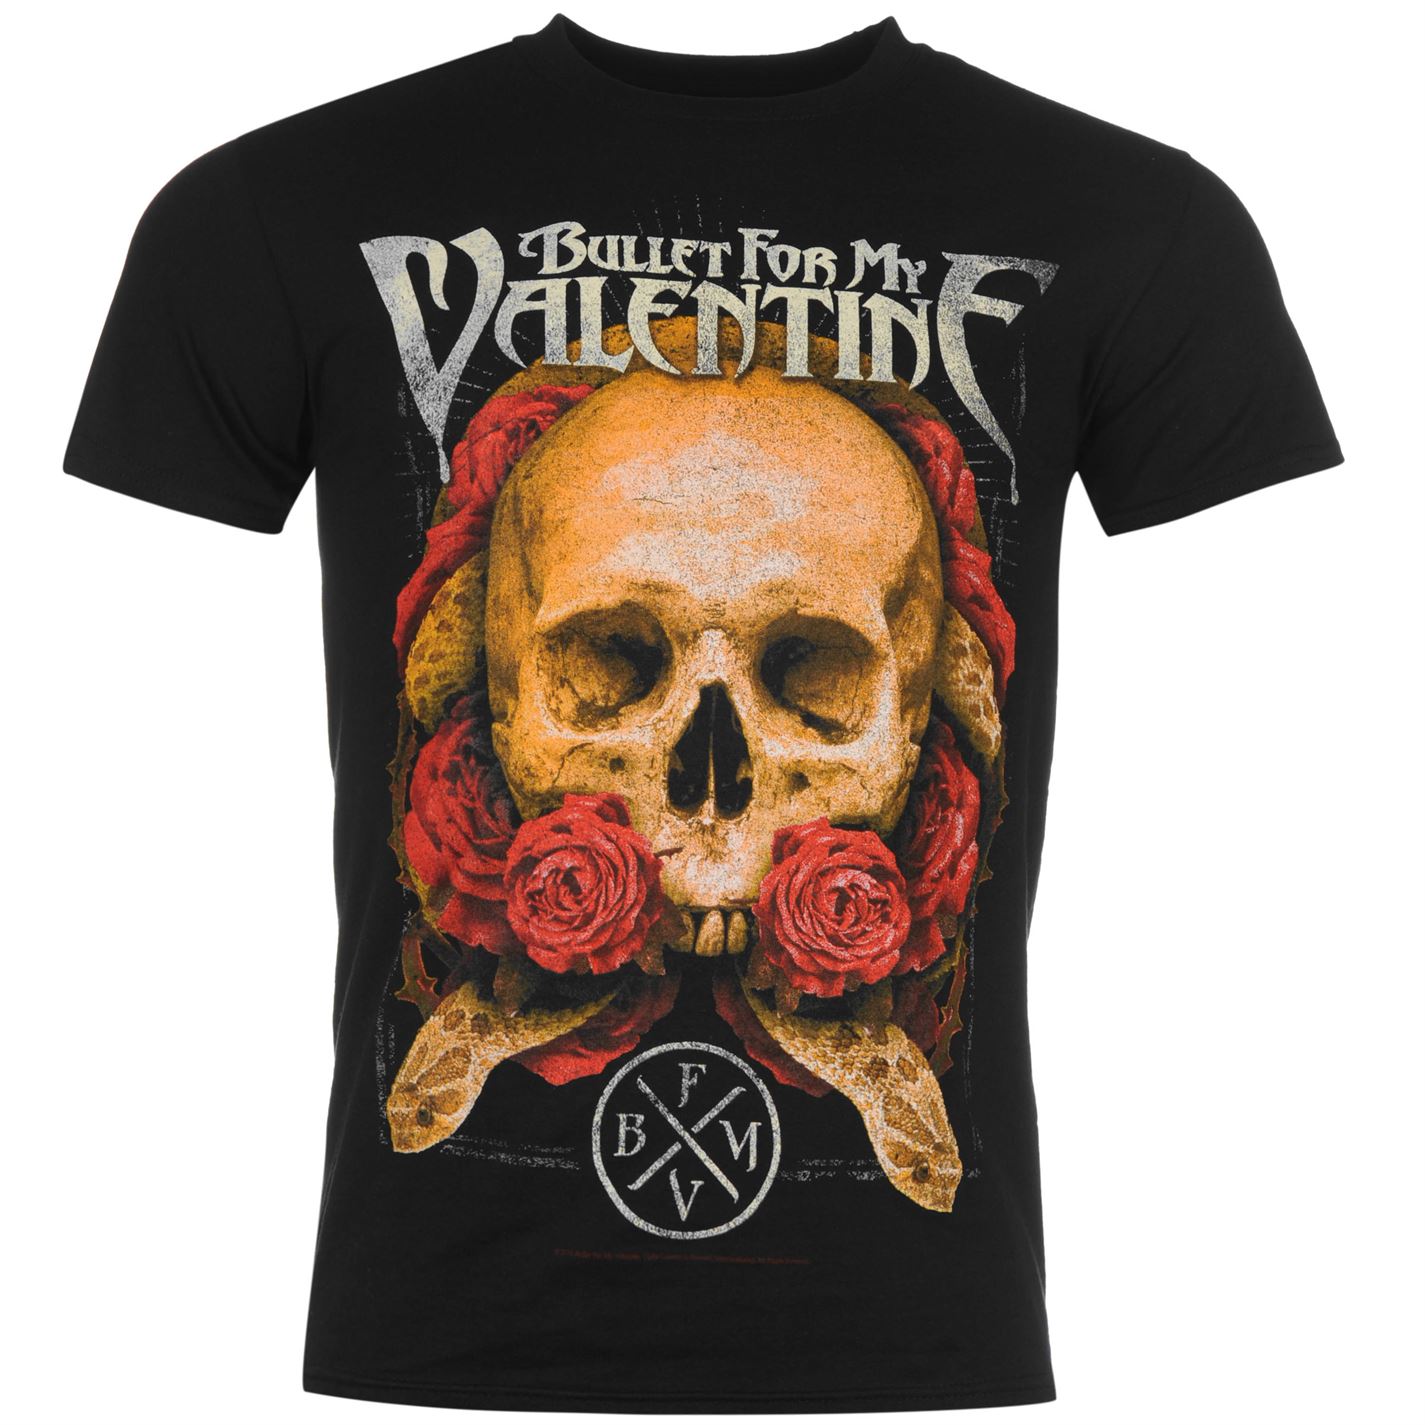 Official Bullet for My Valentine T Shirt